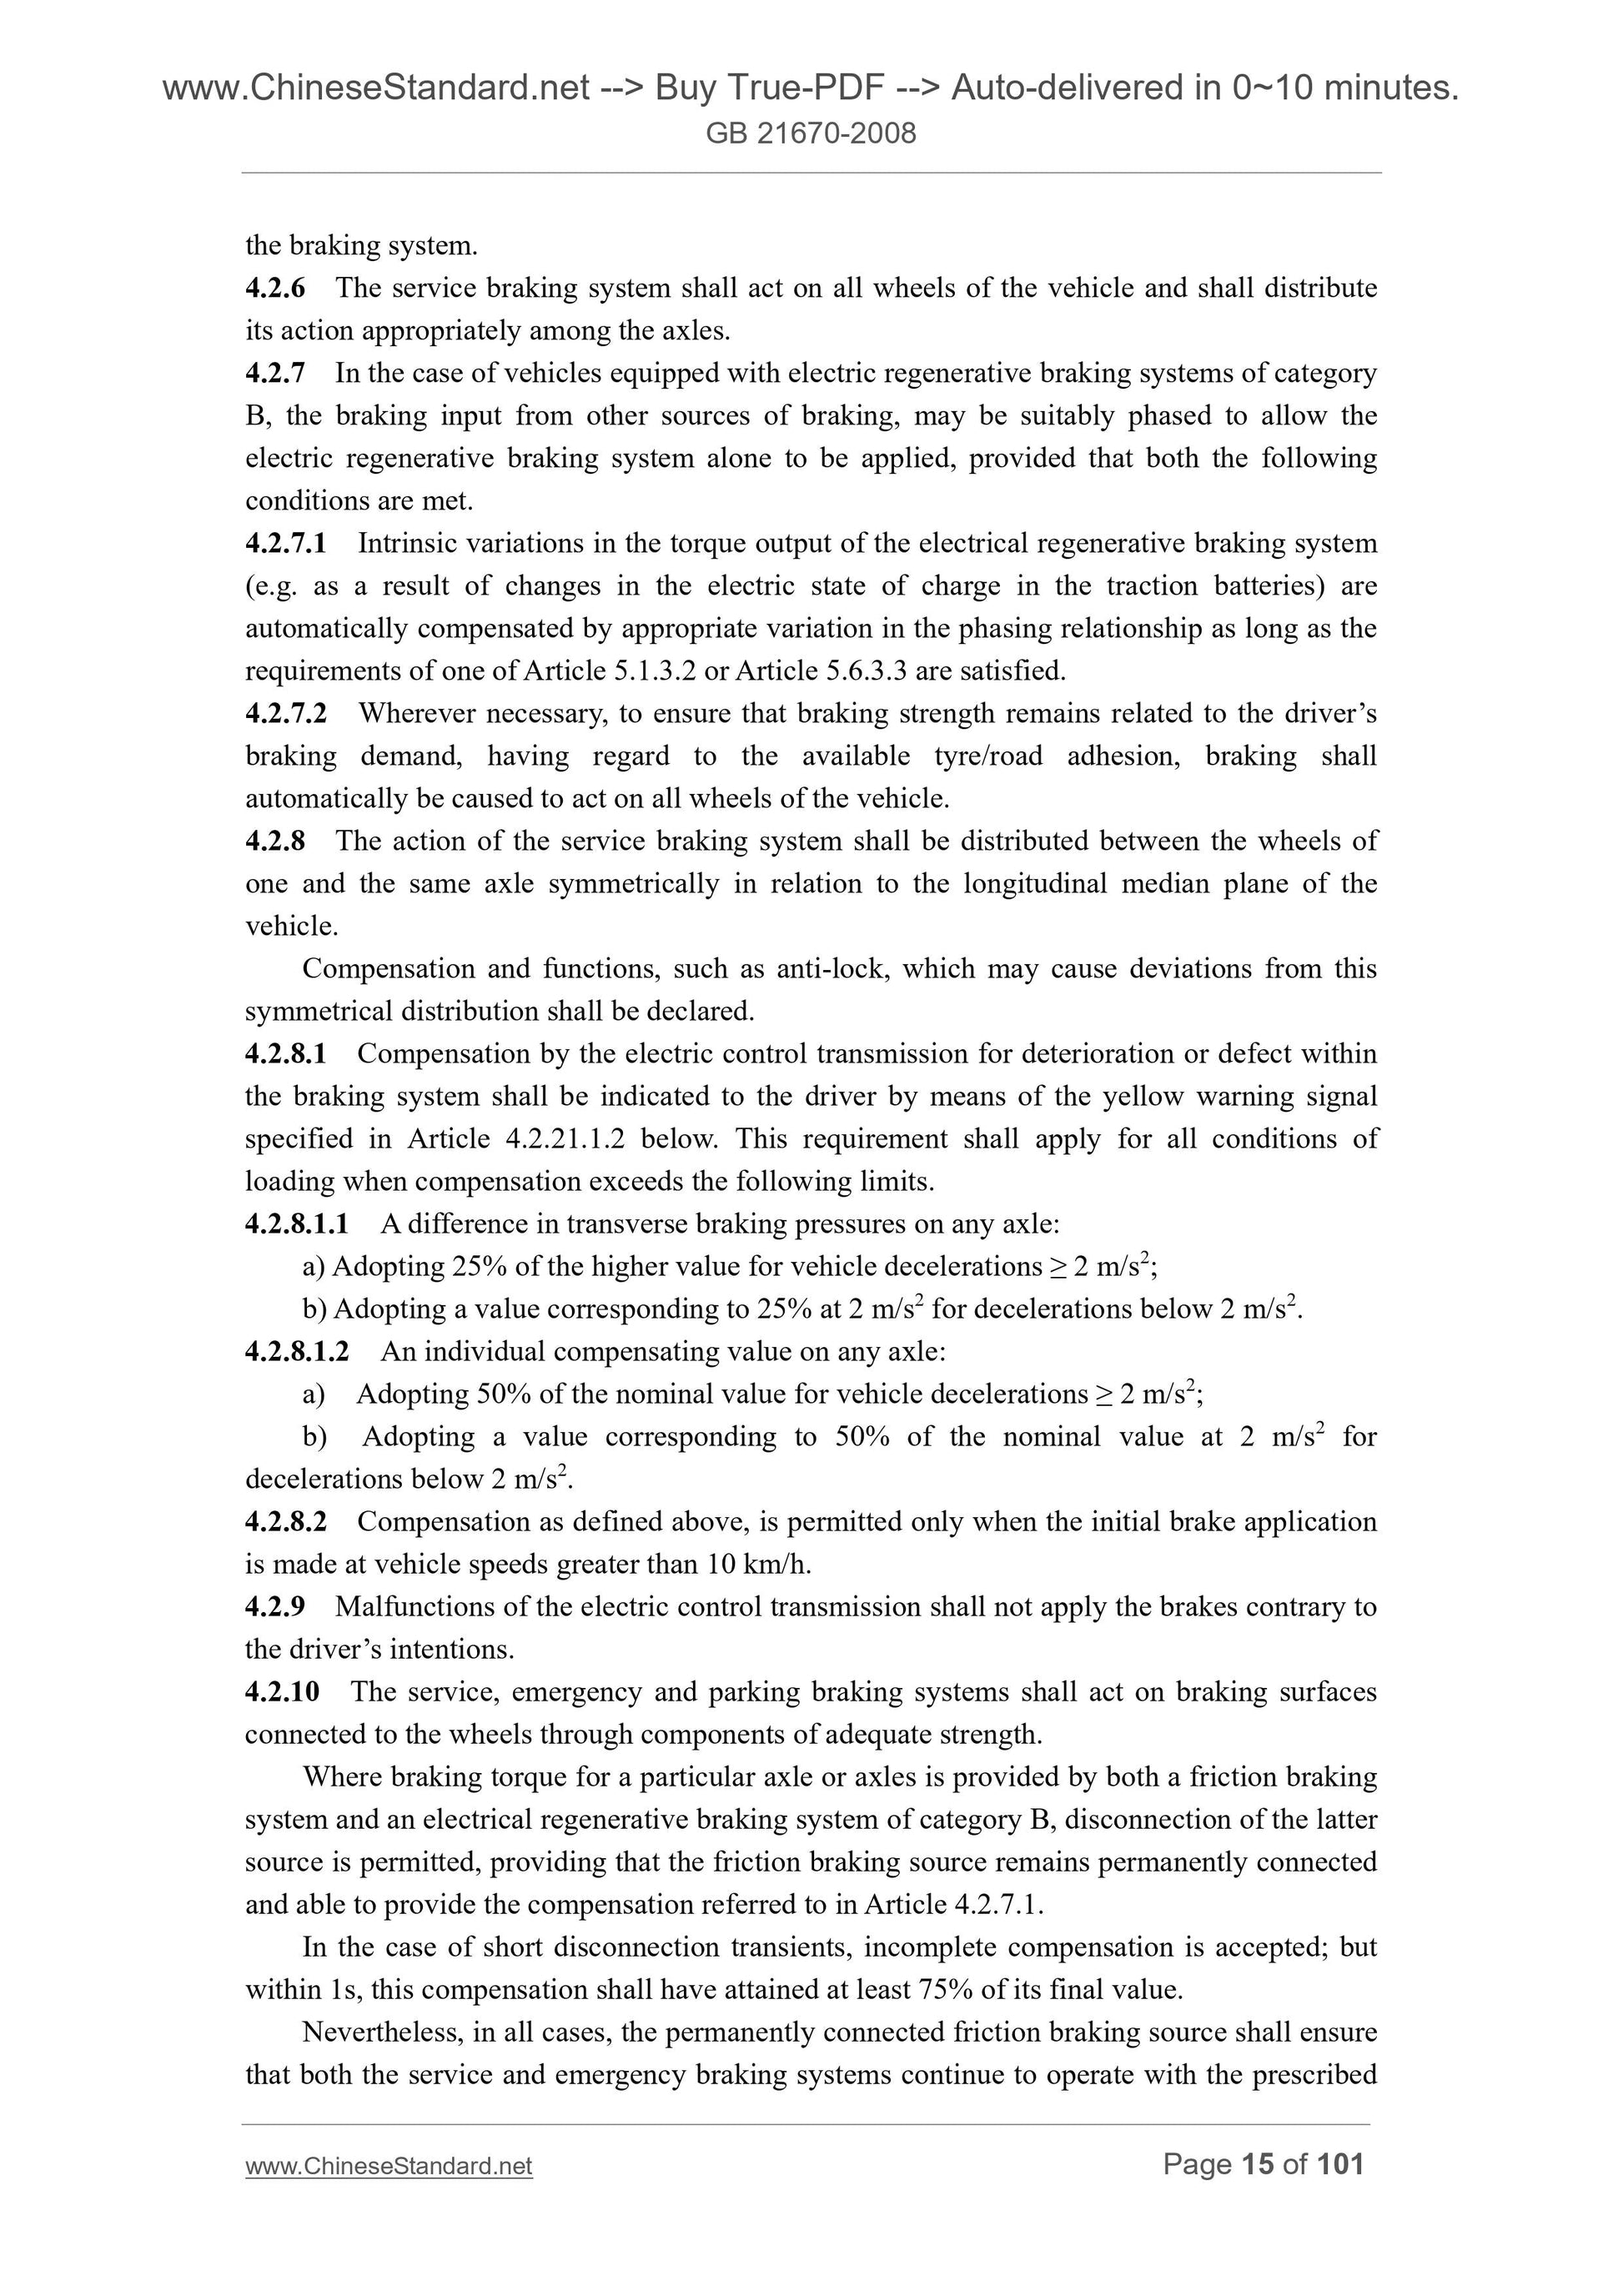 GB 21670-2008 Page 9